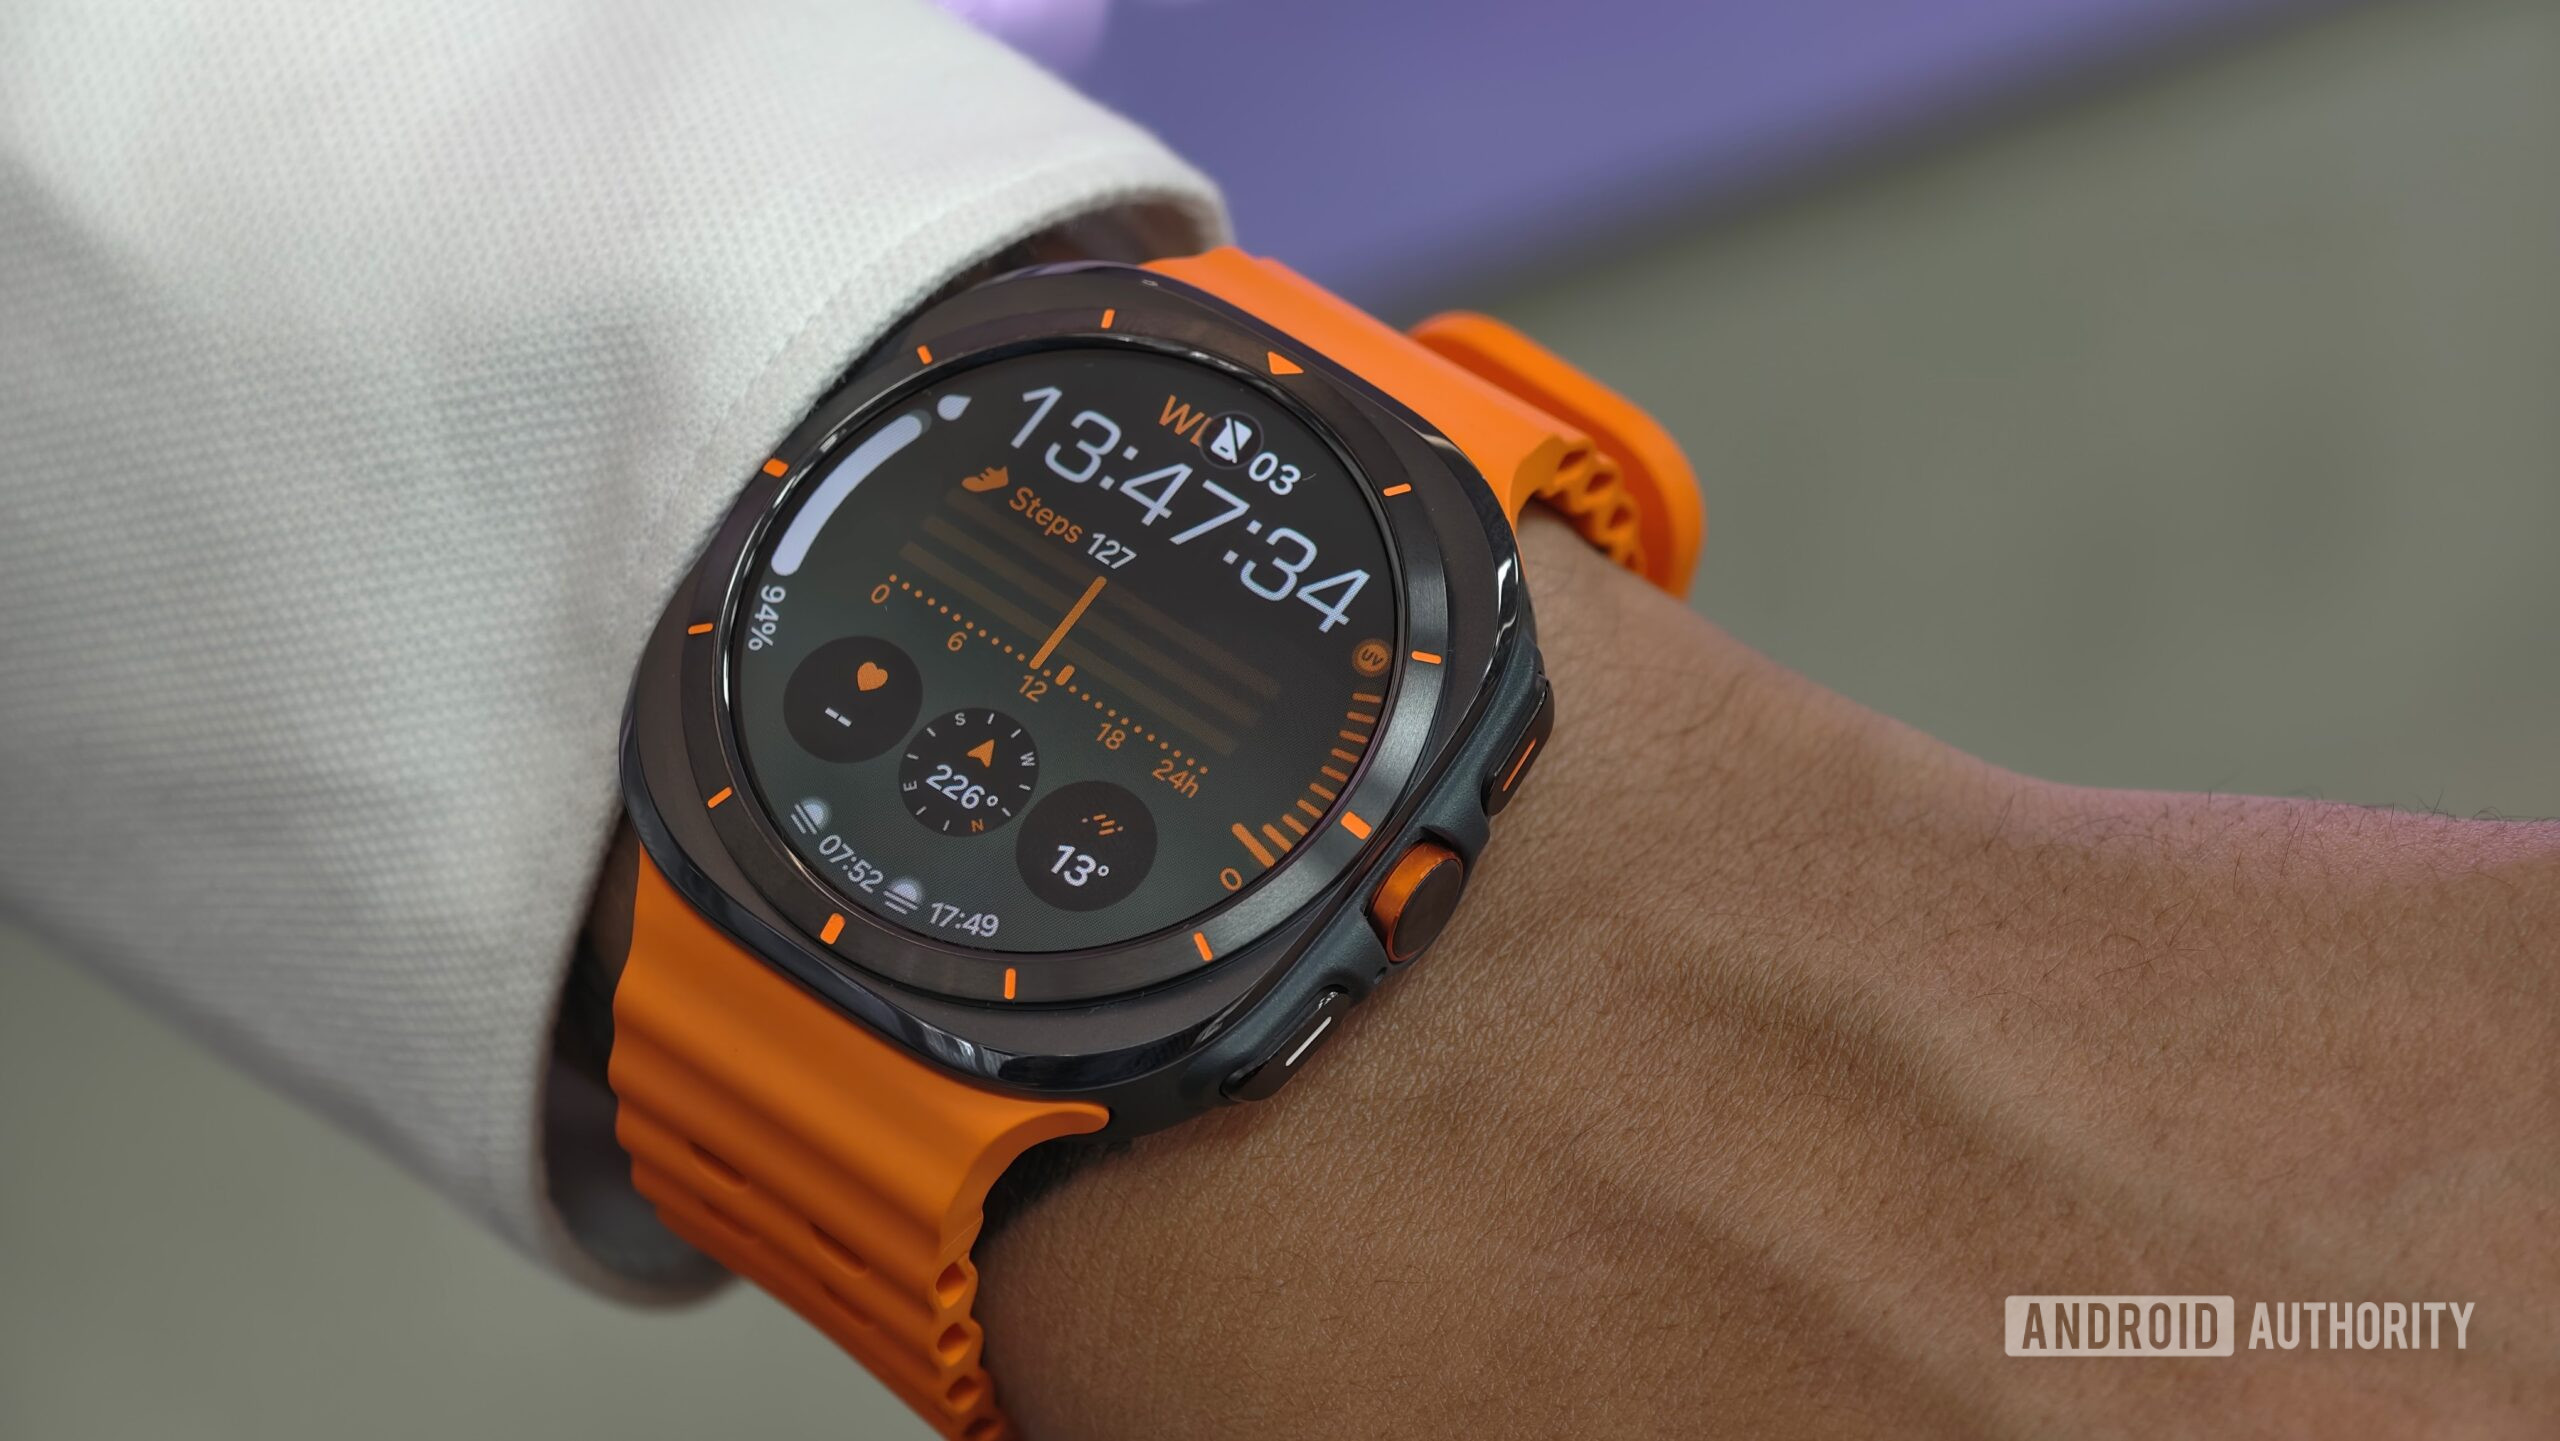 Older Galaxy Watch models could get Ultra-exclusive watch faces with a future update